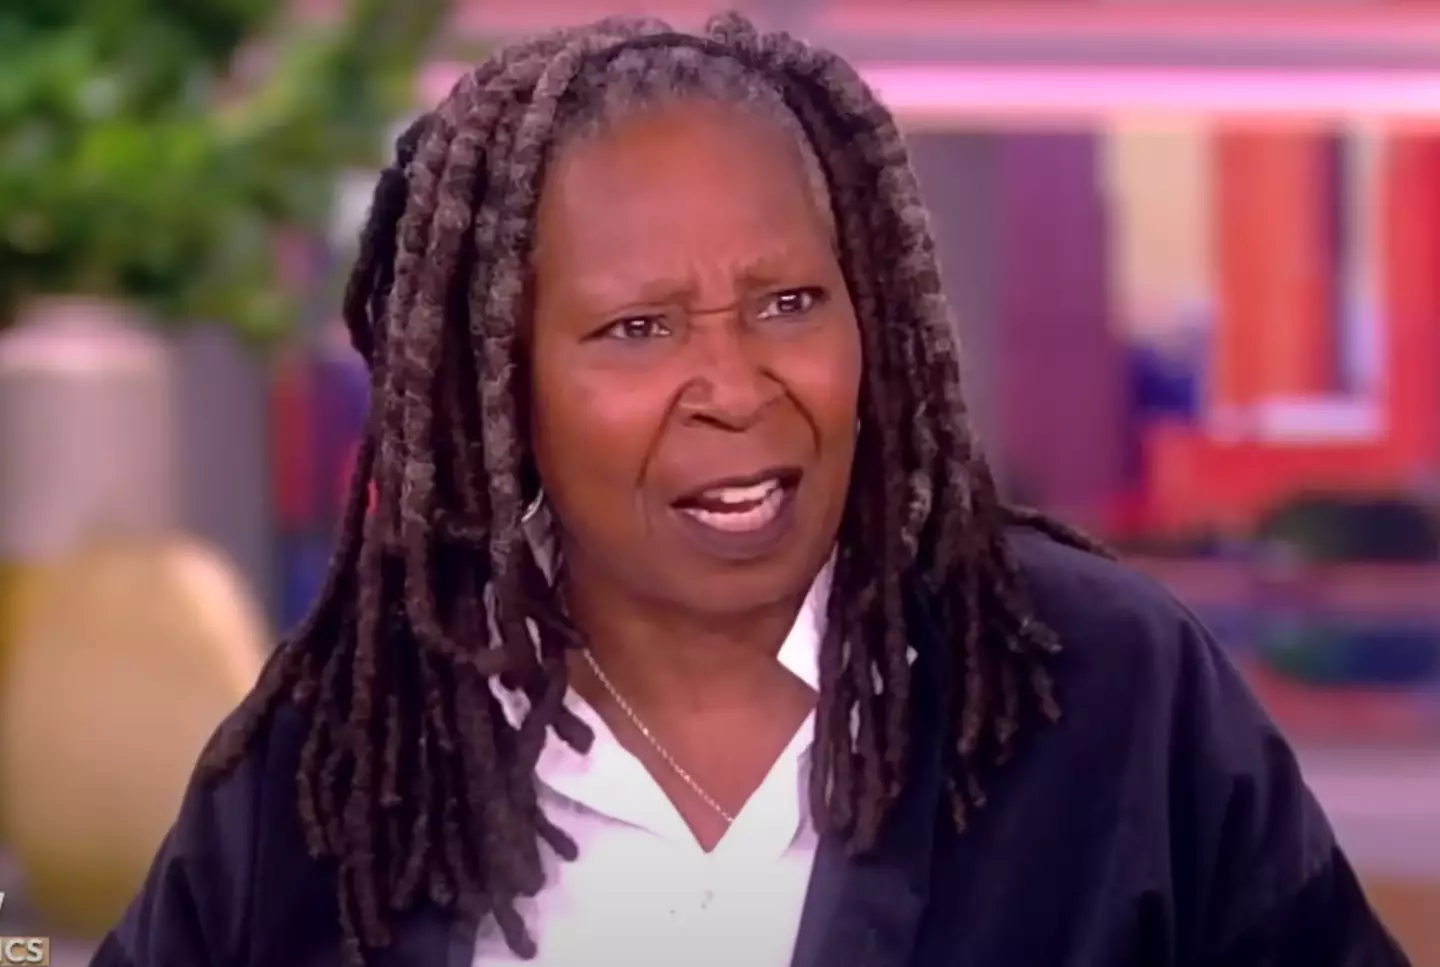 Whoopi Goldberg argued that previous generations all worked hard to reach their milestones.